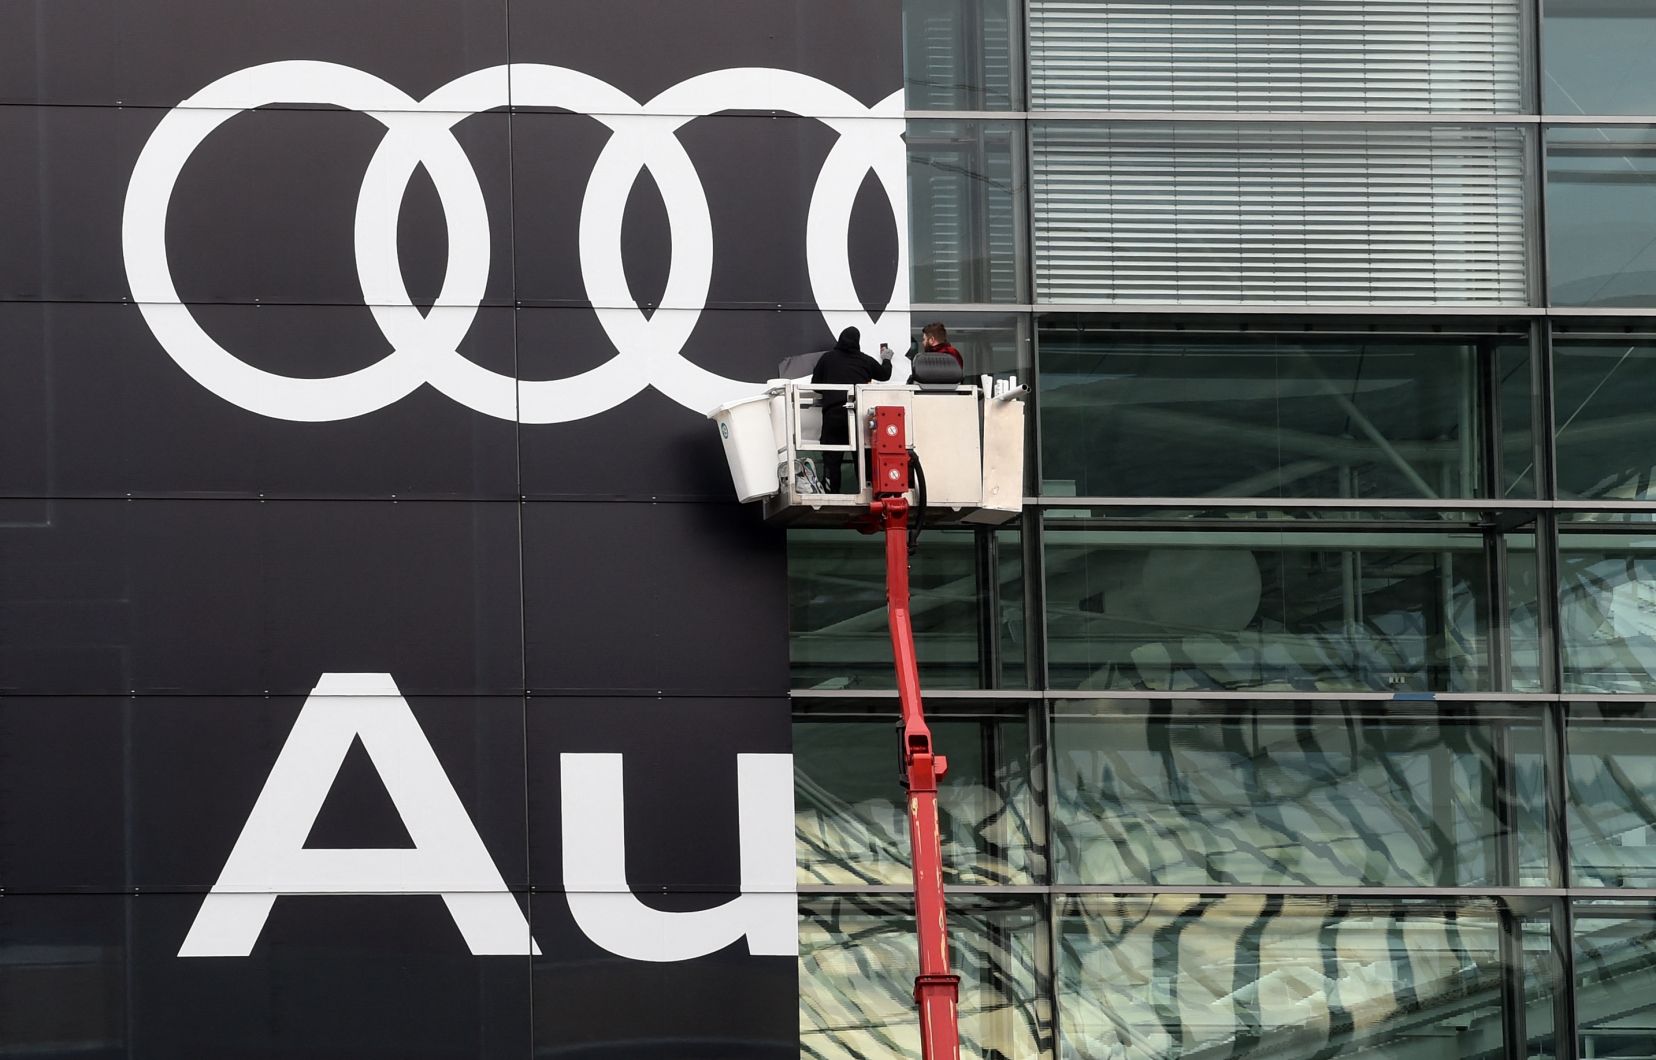 Data theft: Class action against Audi and Volkswagen for negligence

